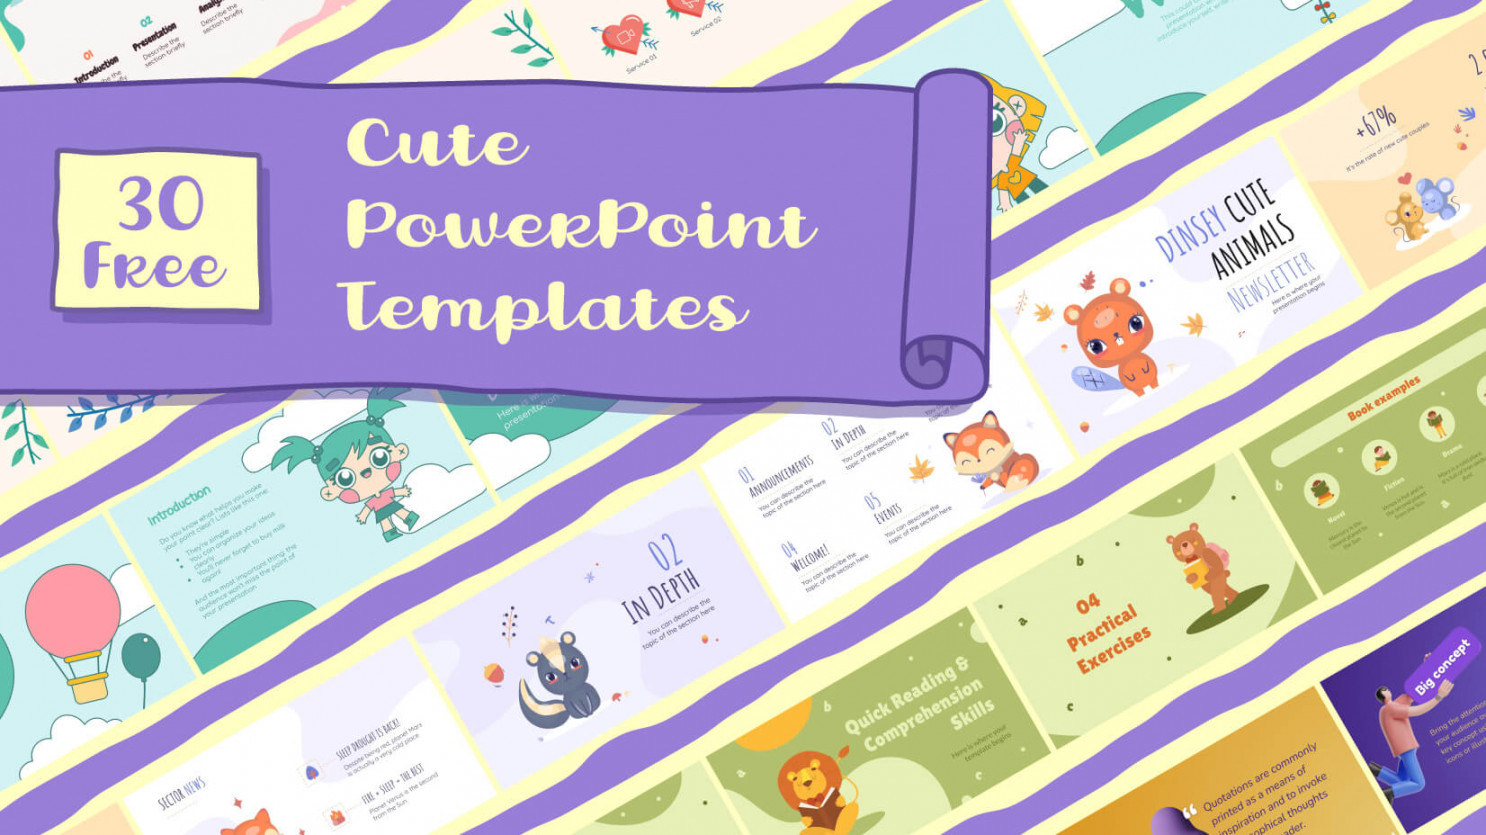 Free Cute PowerPoint Templates: Collection For A Sweet Presentation